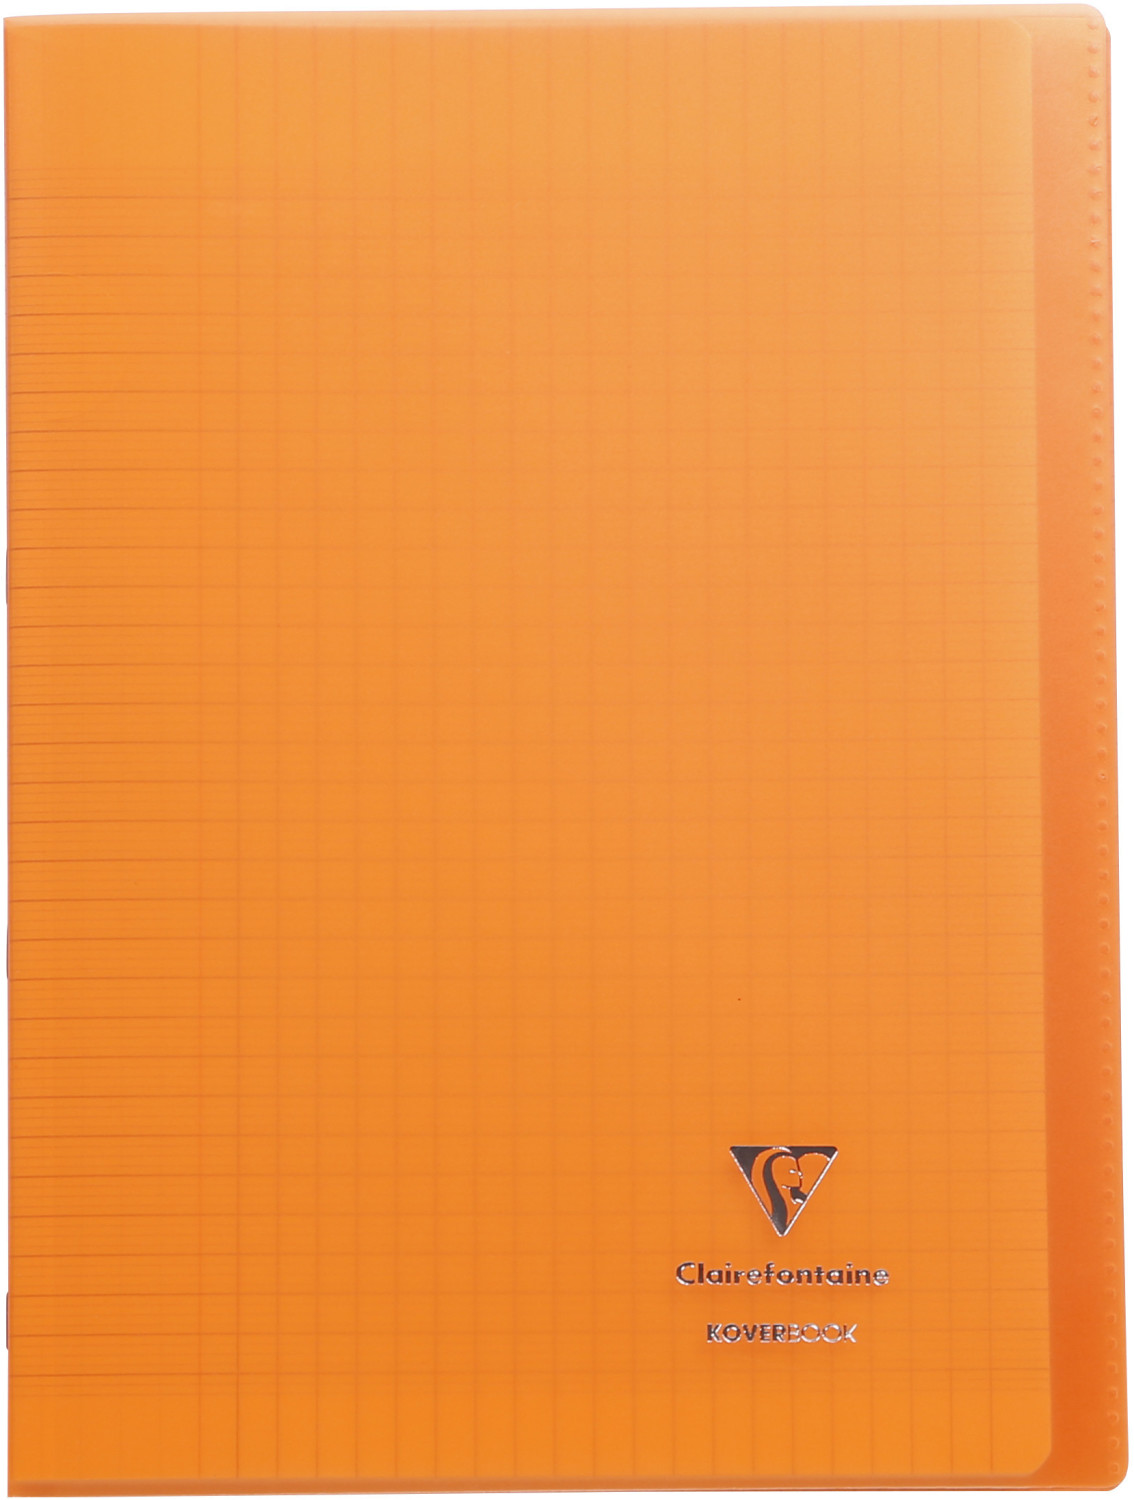 Cahiers koverbook neuf clairefontaine 21x29,7 96 pages neuf